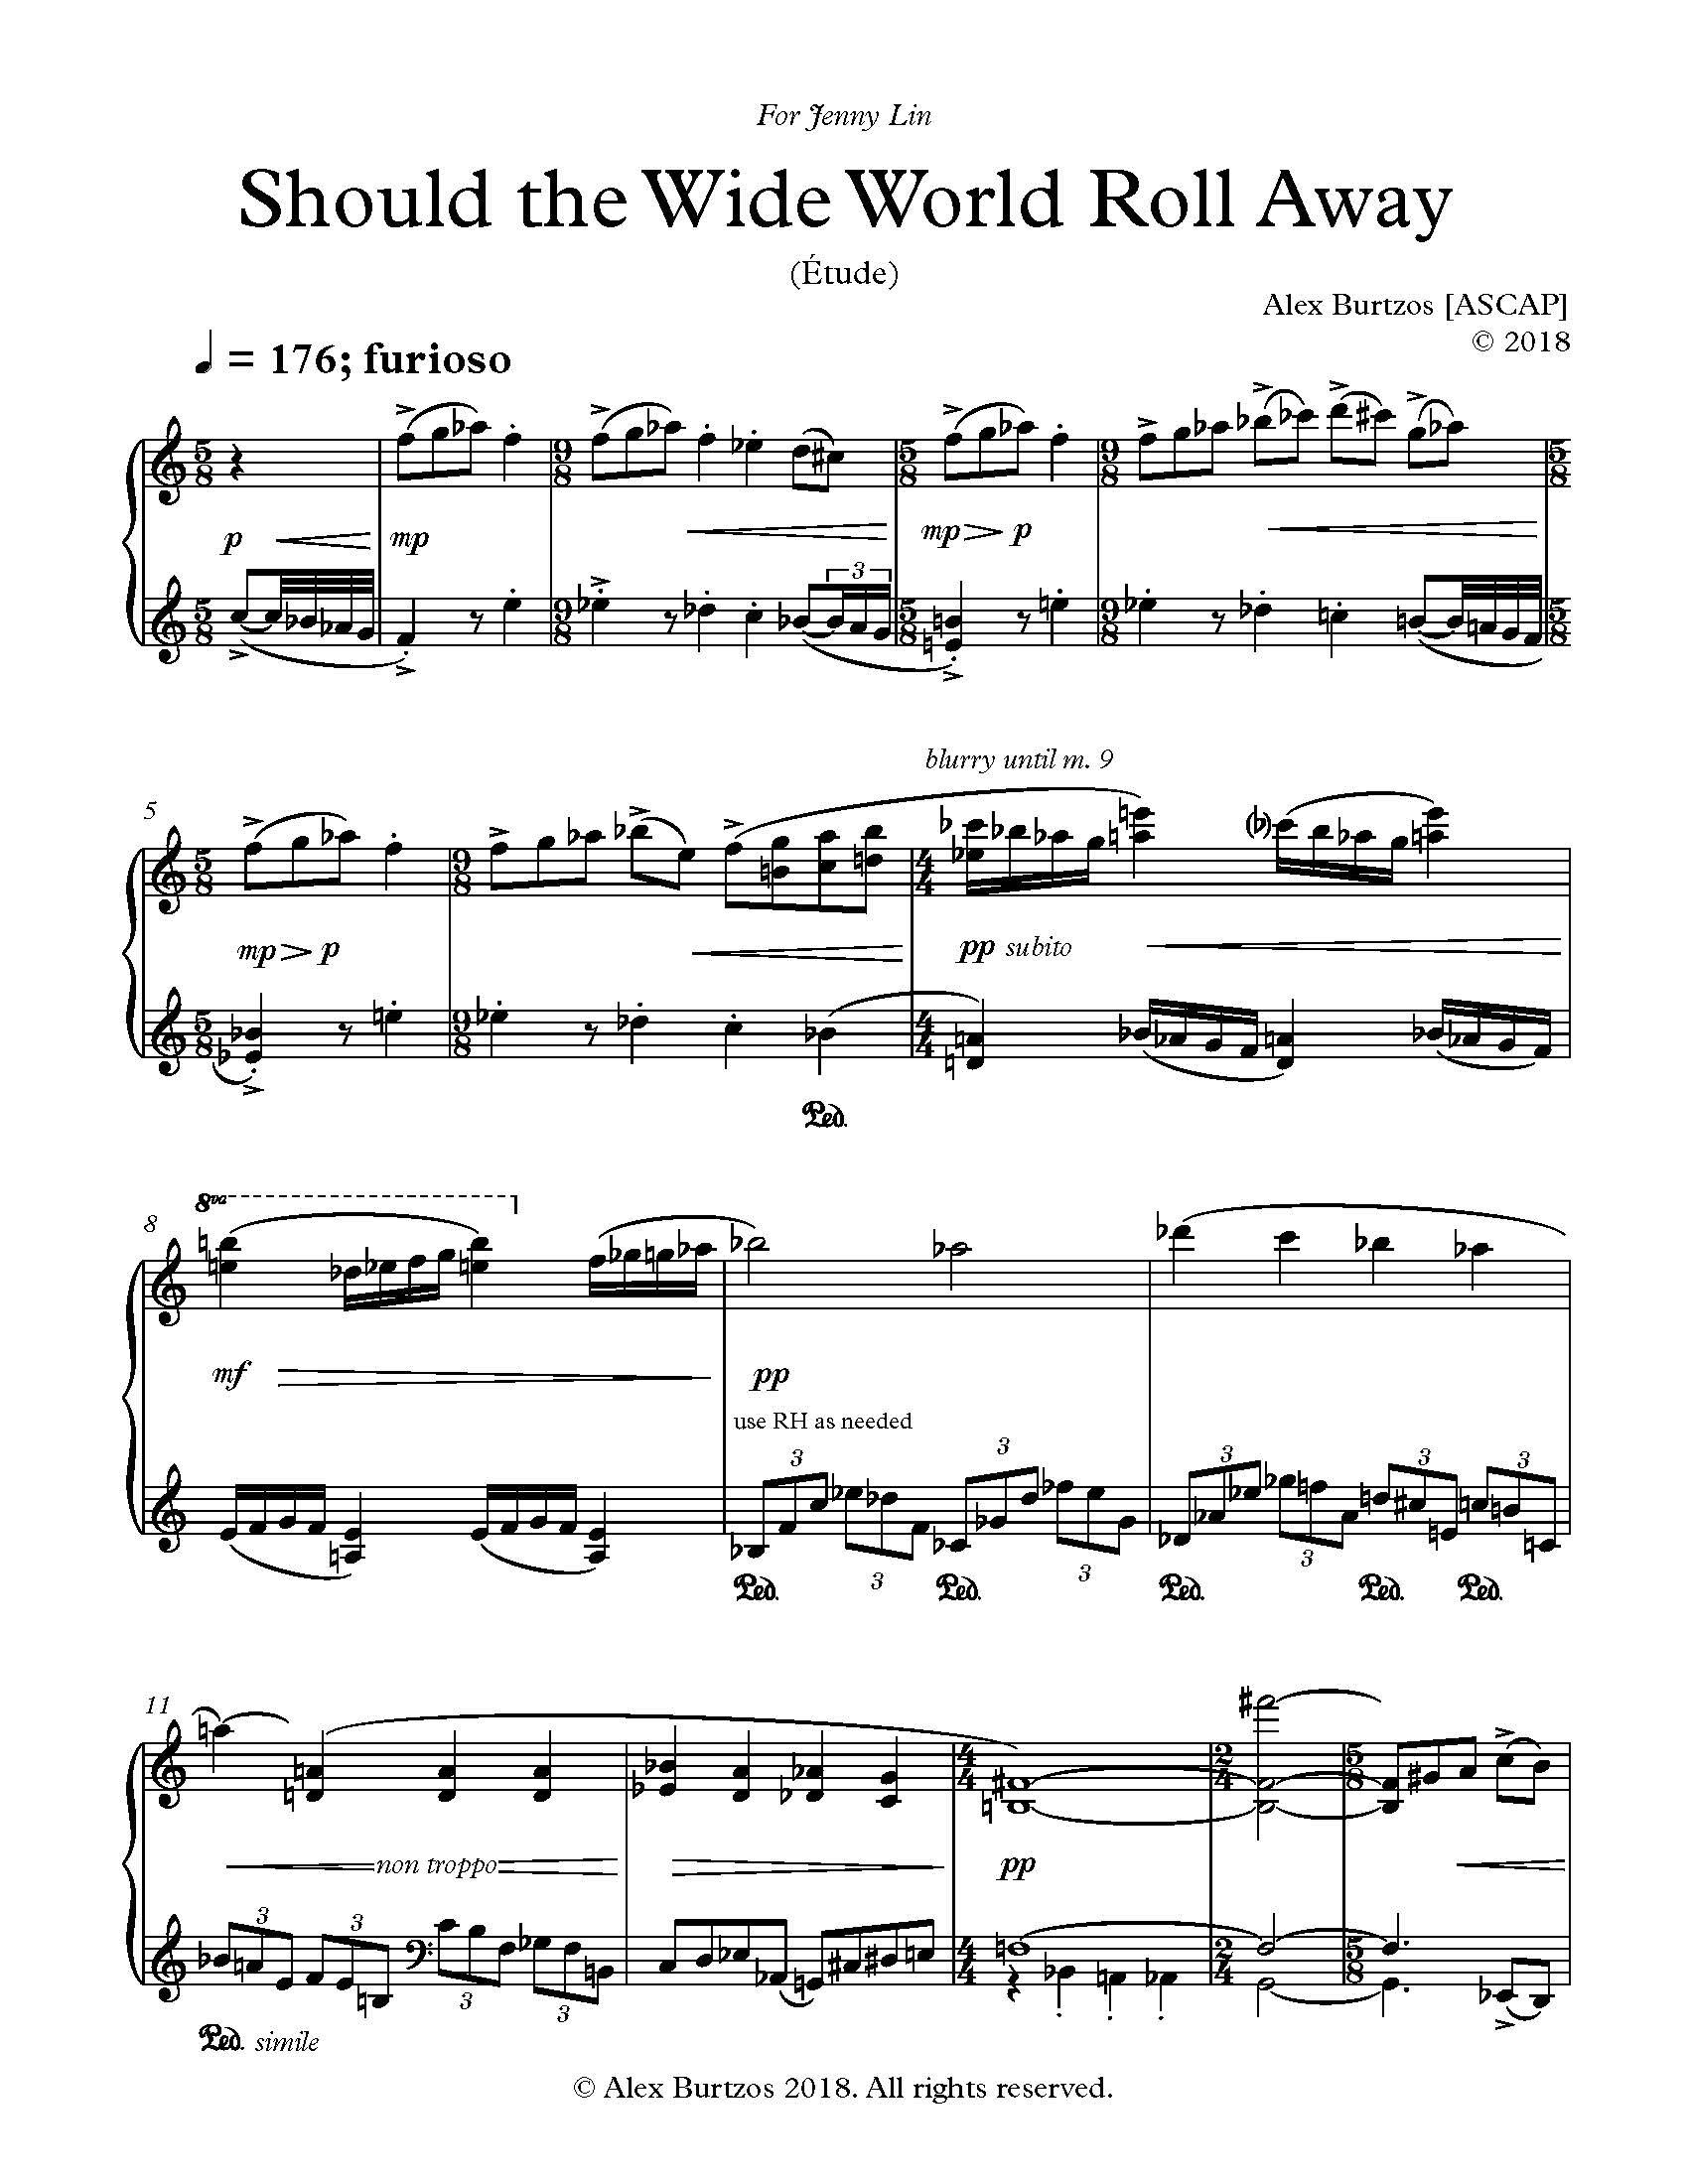 Should the Wide World Roll Away - Complete Score_Page_07.jpg